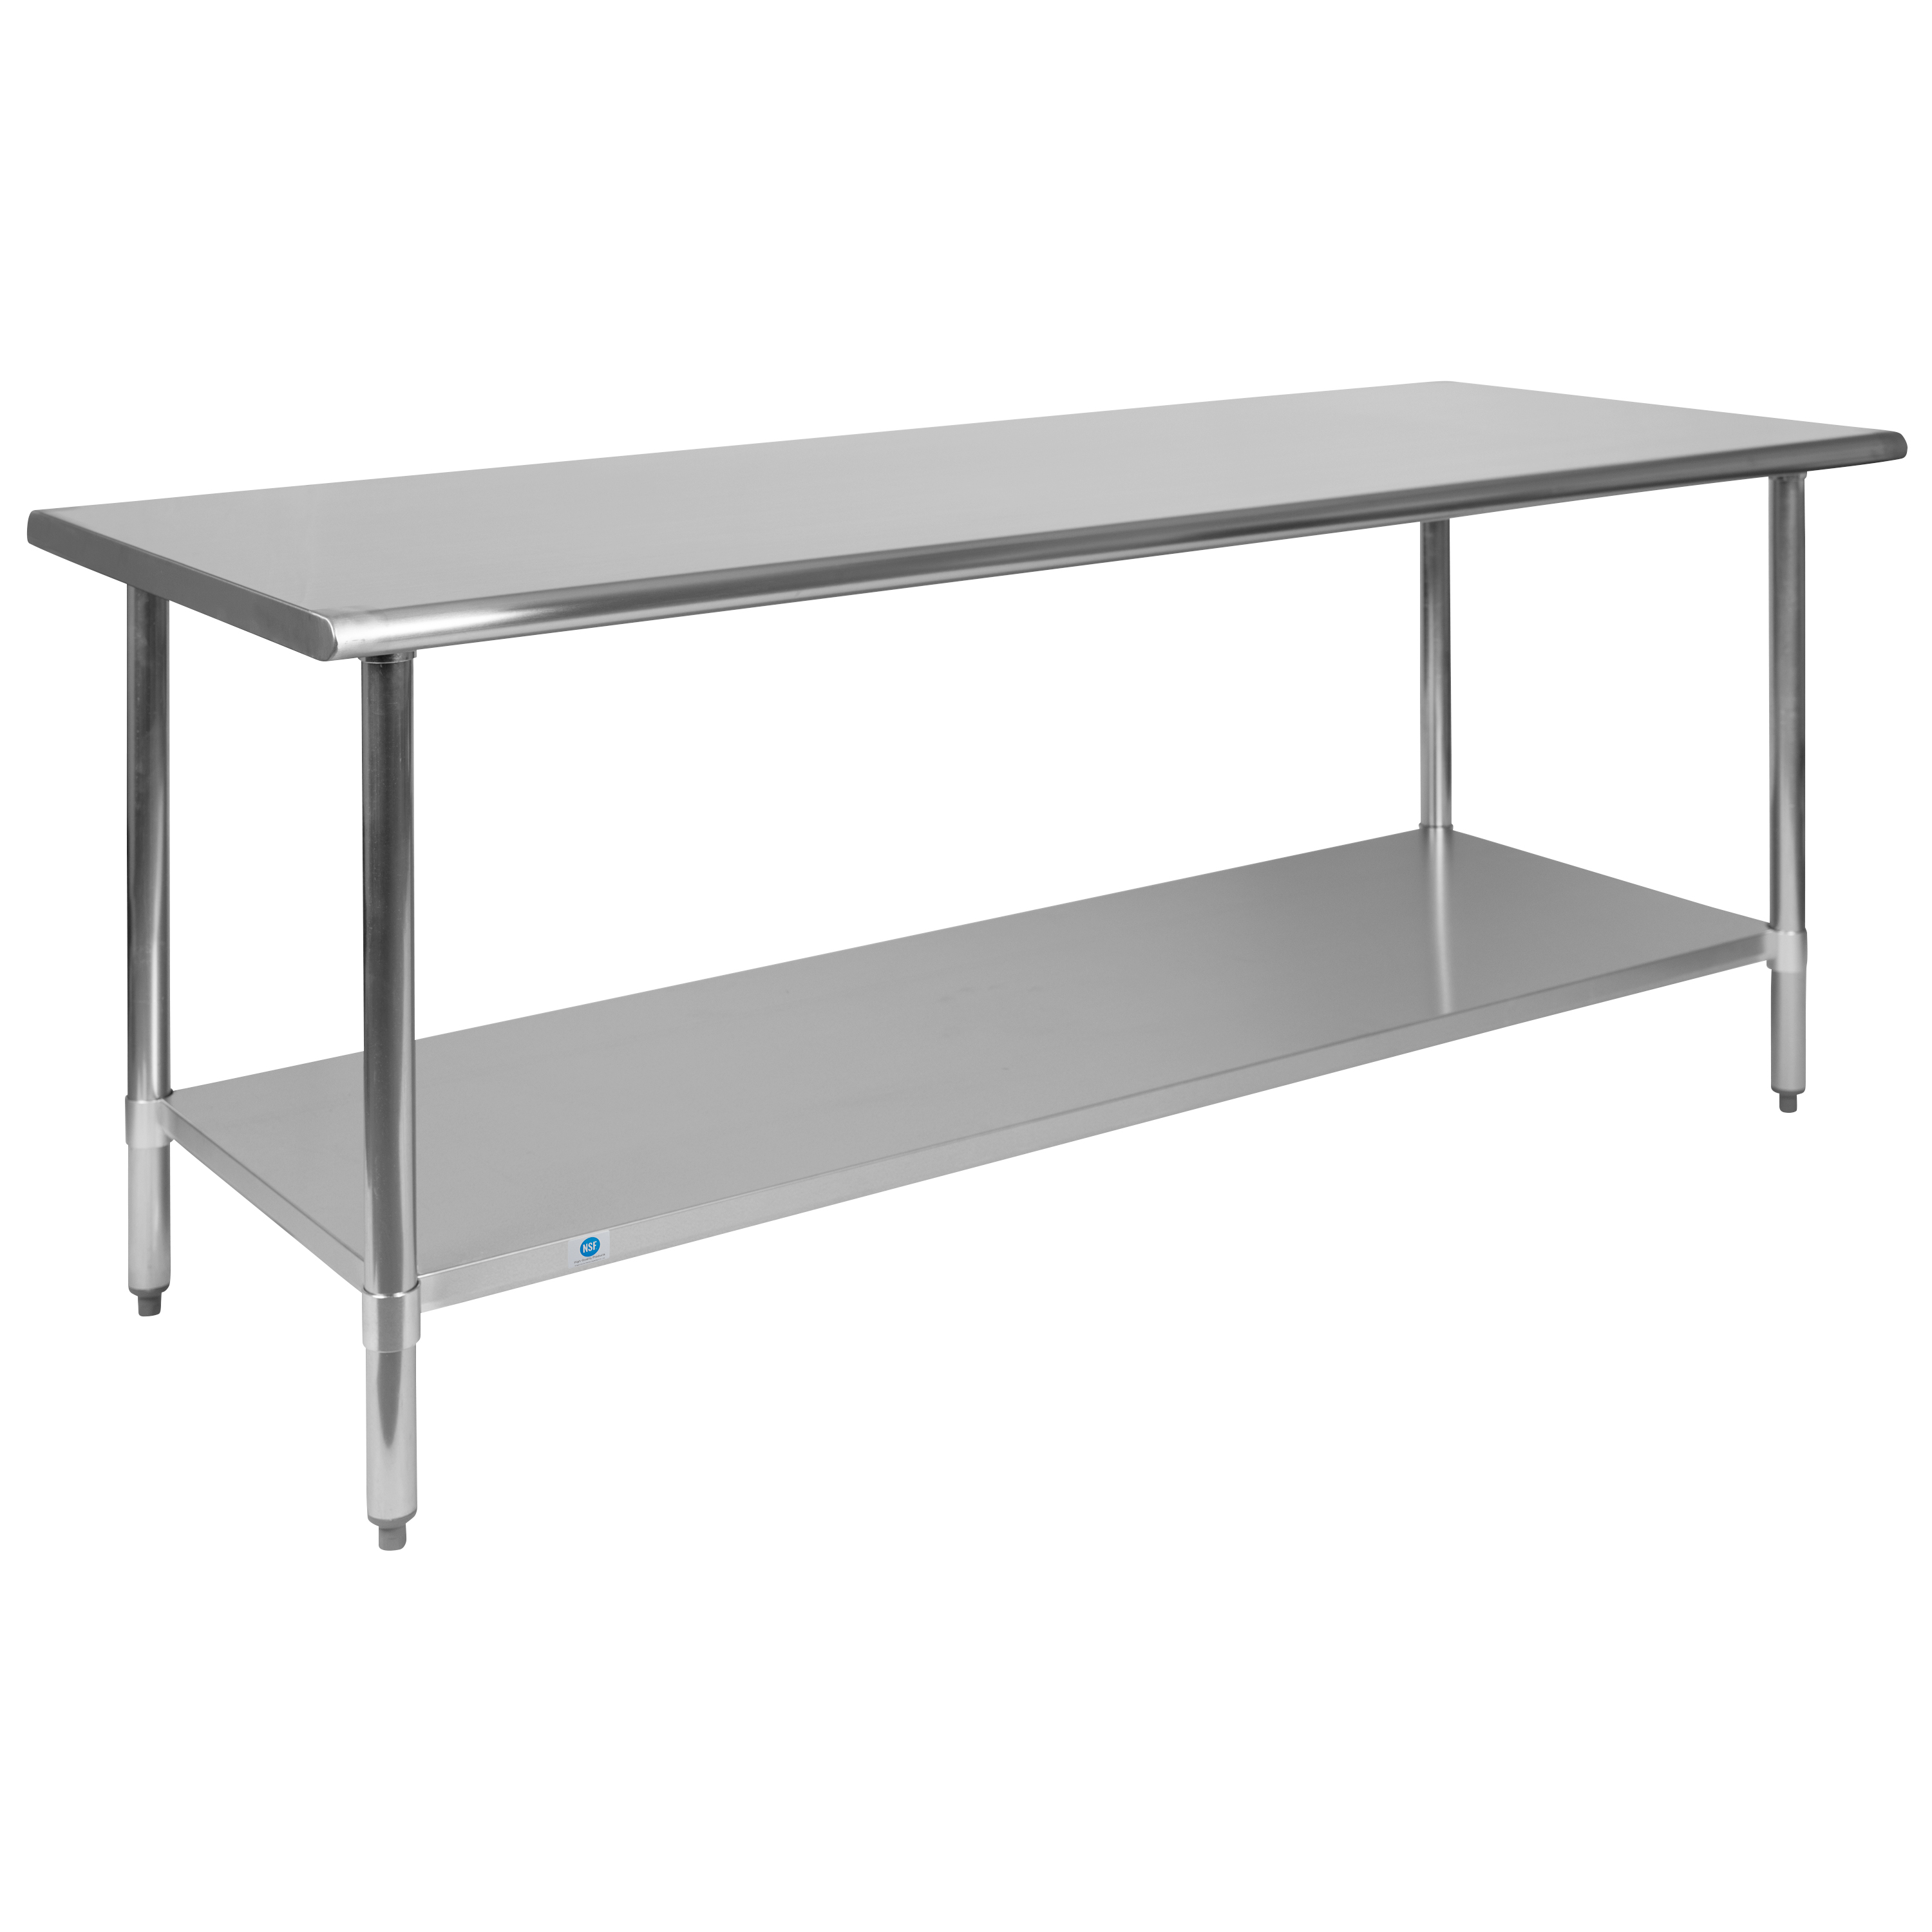 Flash Furniture NH-WT-3072-GG Stainless Steel 18 Gauge Work Table with Undershelf, 72"W x 30"D x 34.5"H